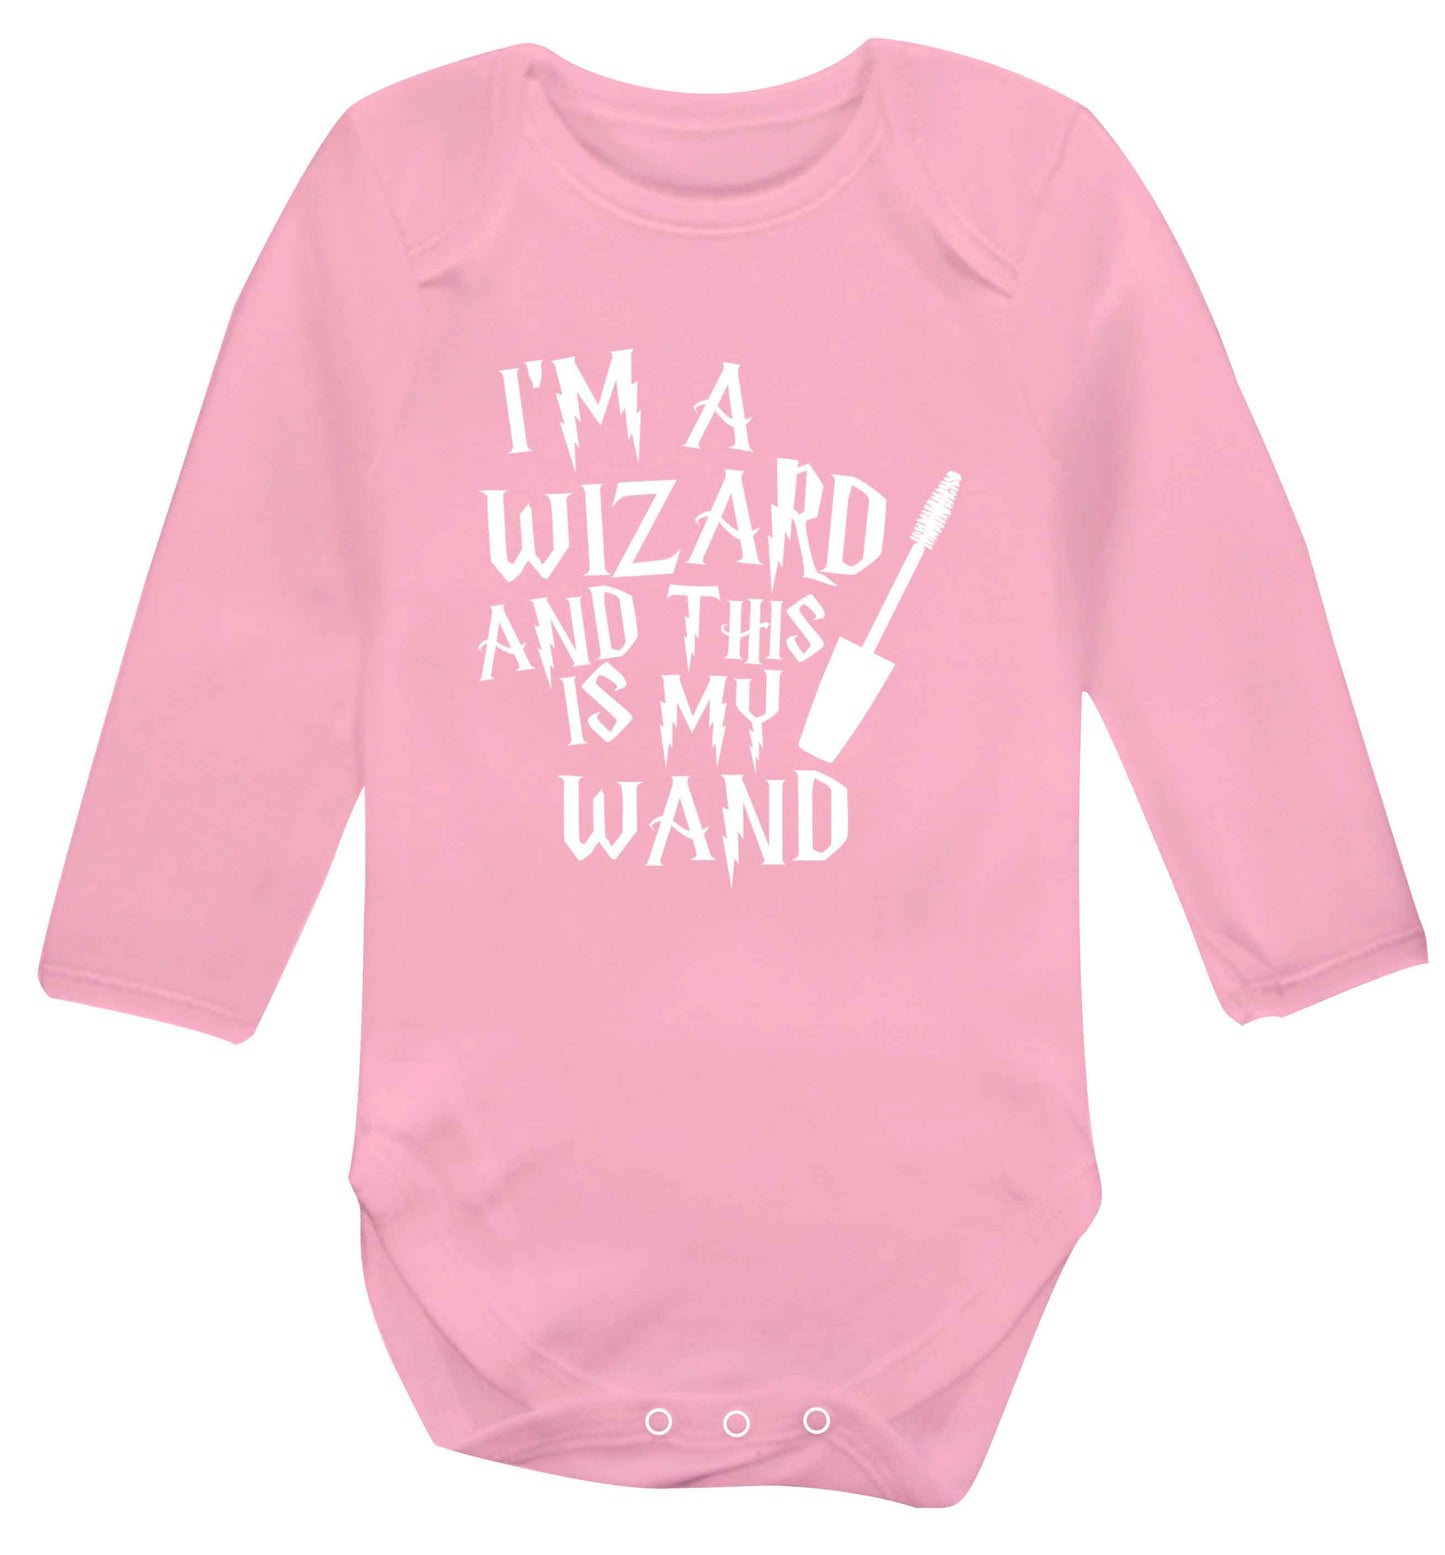 I'm a wizard and this is my wand Baby Vest long sleeved pale pink 6-12 months